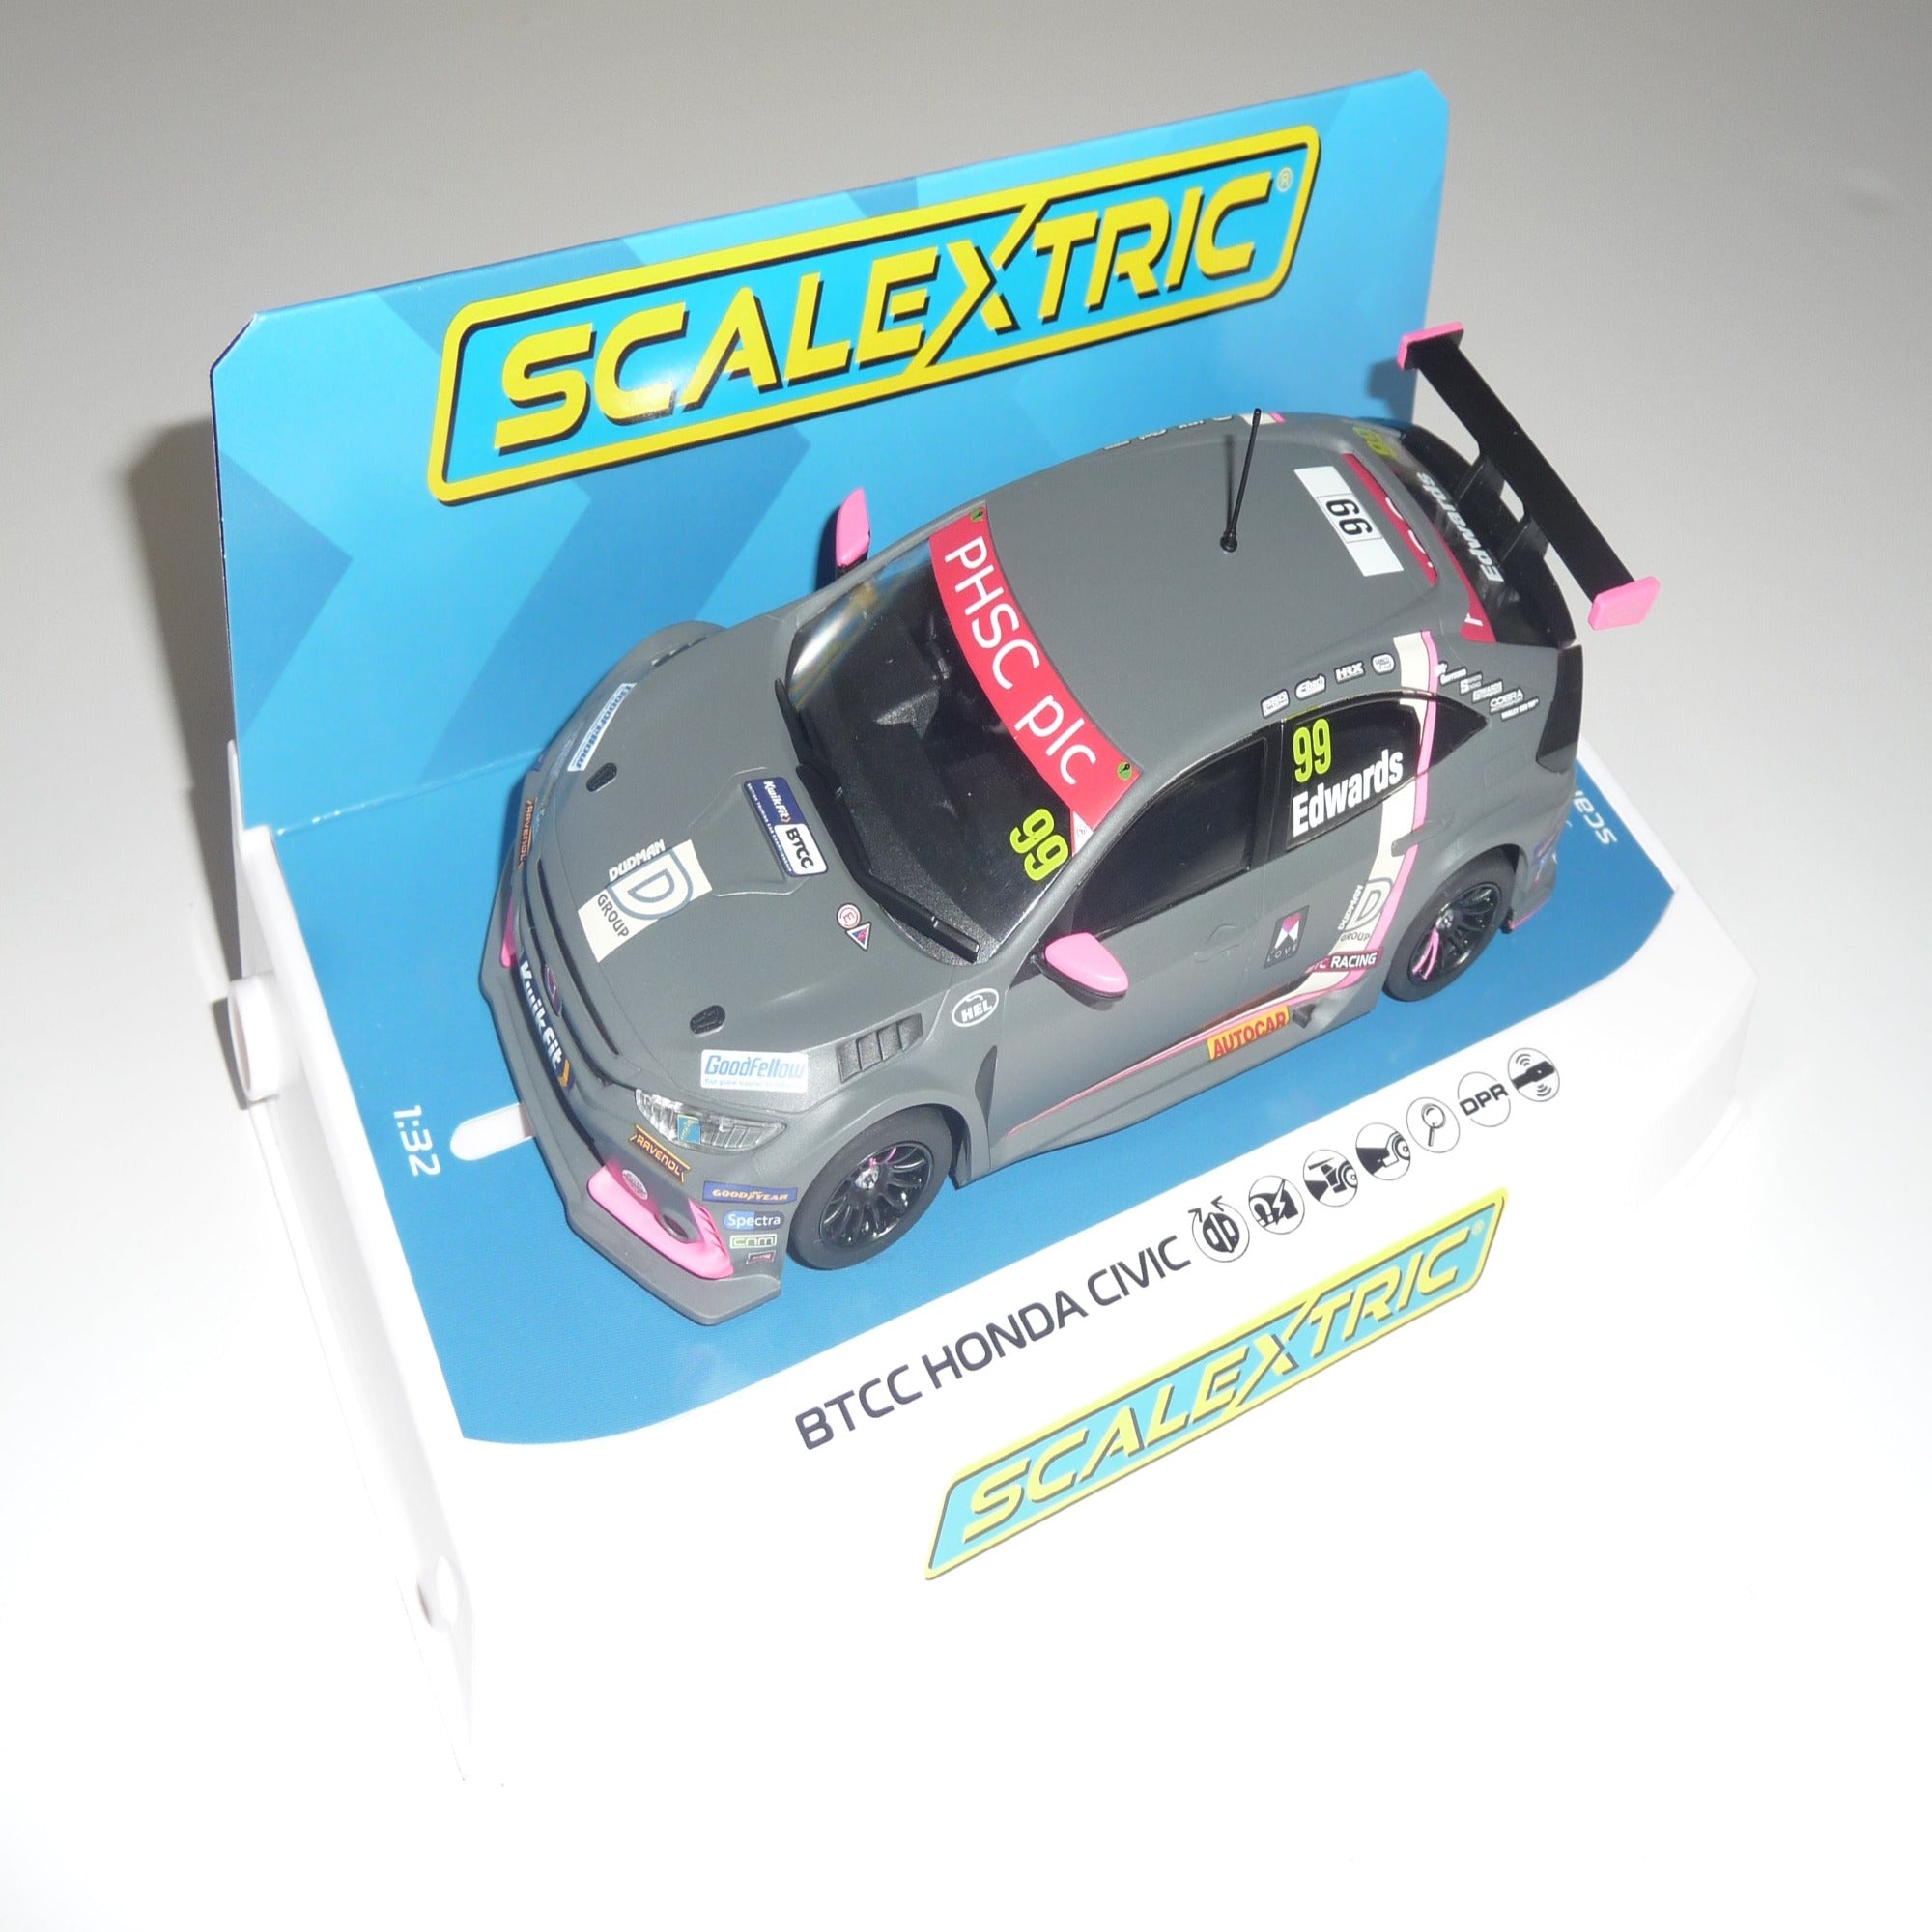 Scalextric Honda Civic Type R C4317 Free Postage on Orders over $40